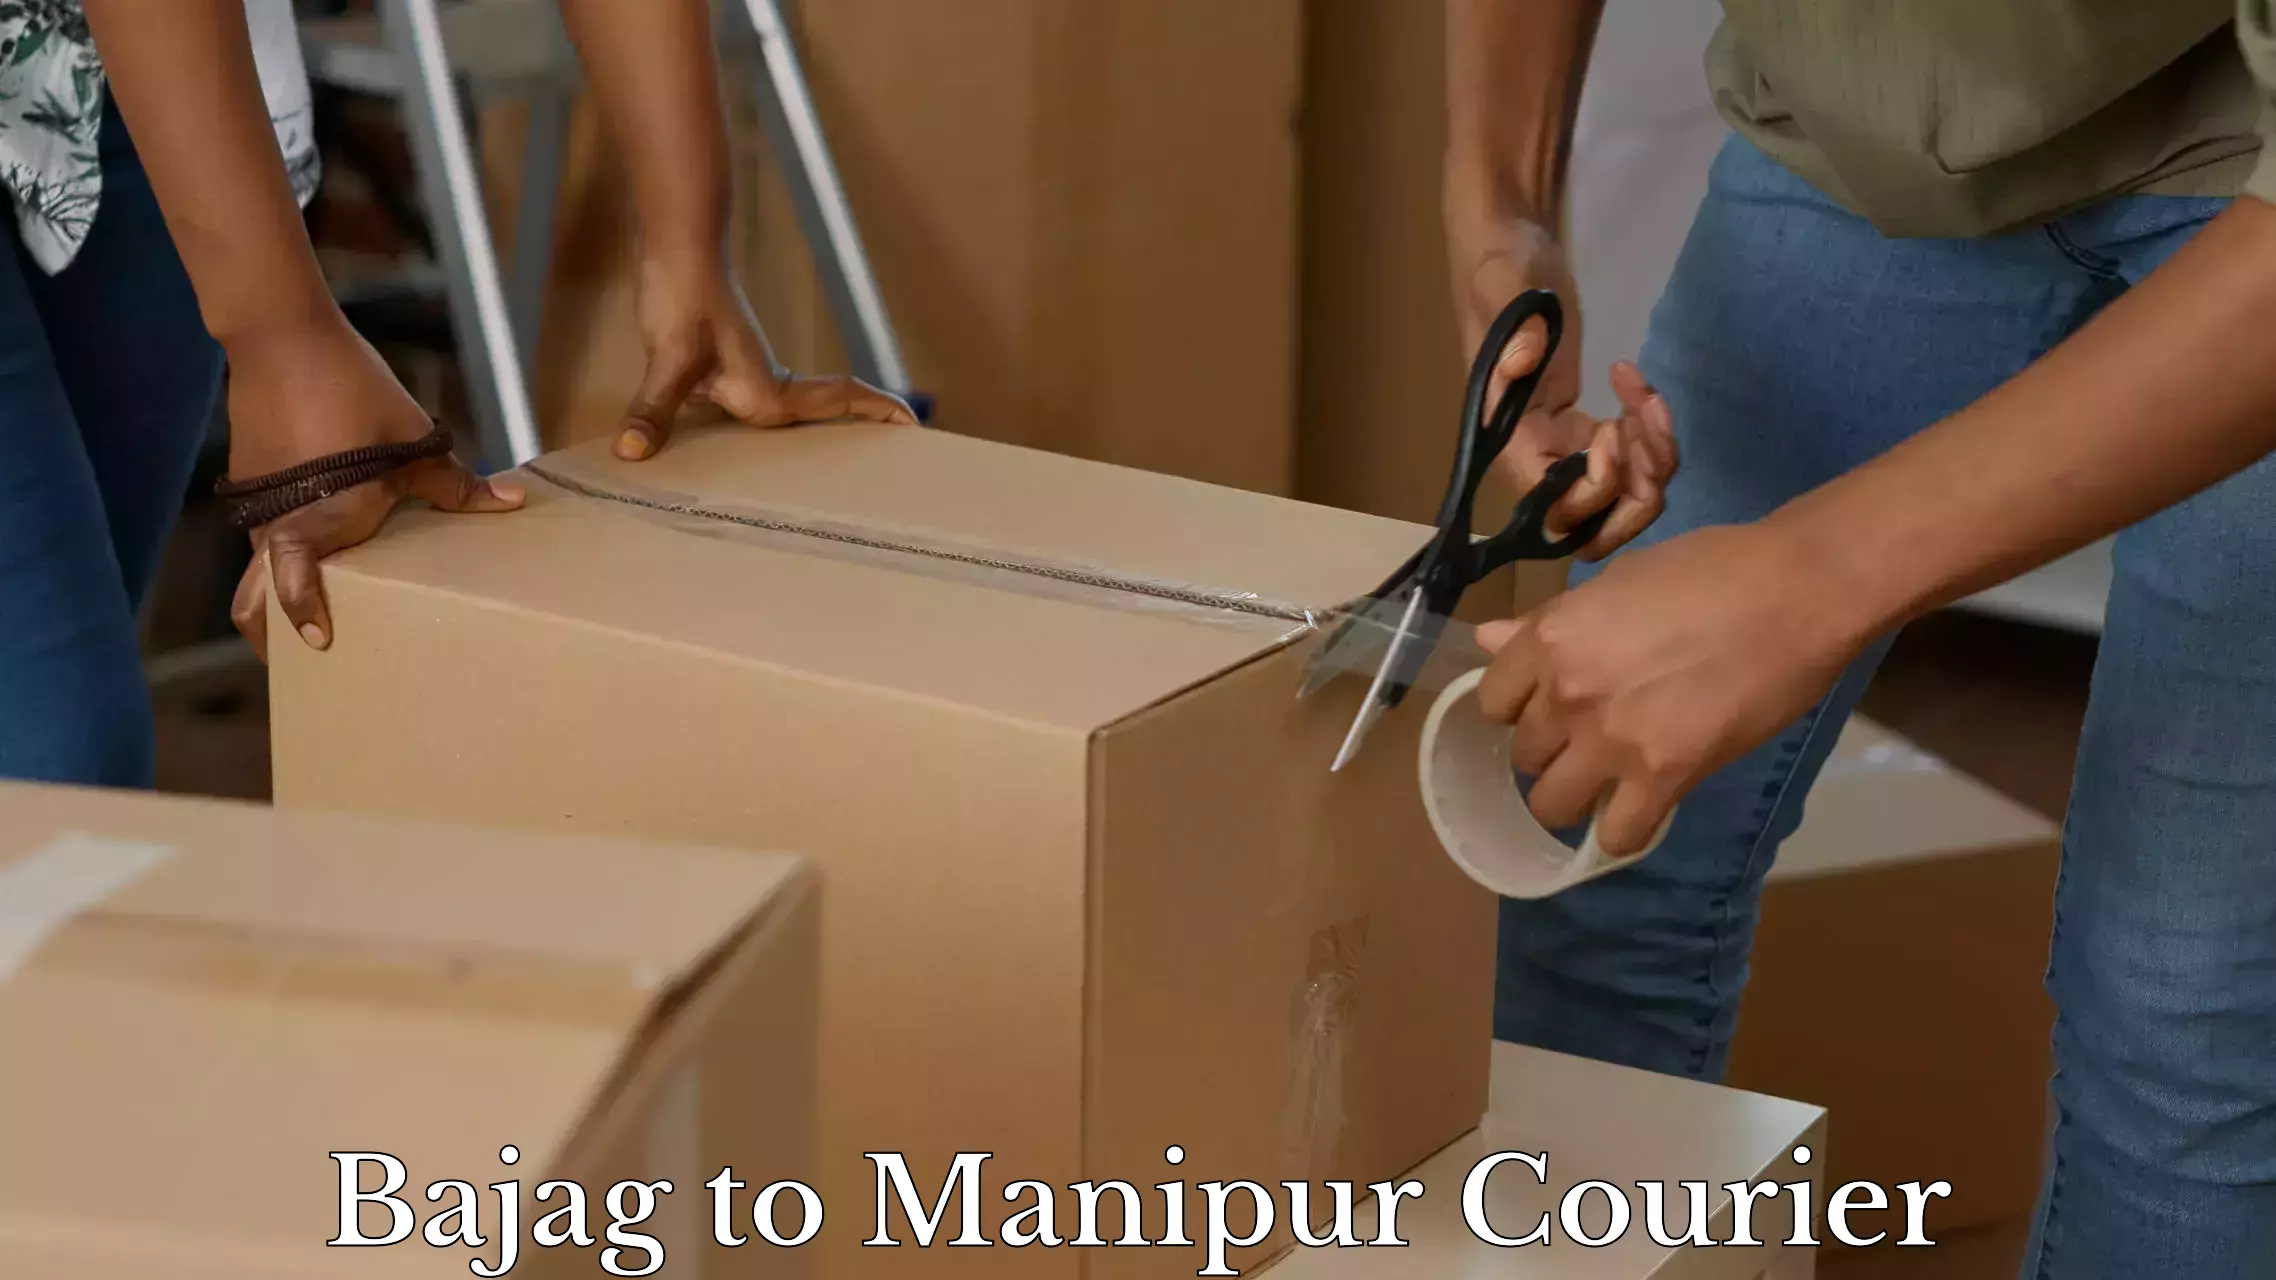 Luggage transport company Bajag to Manipur